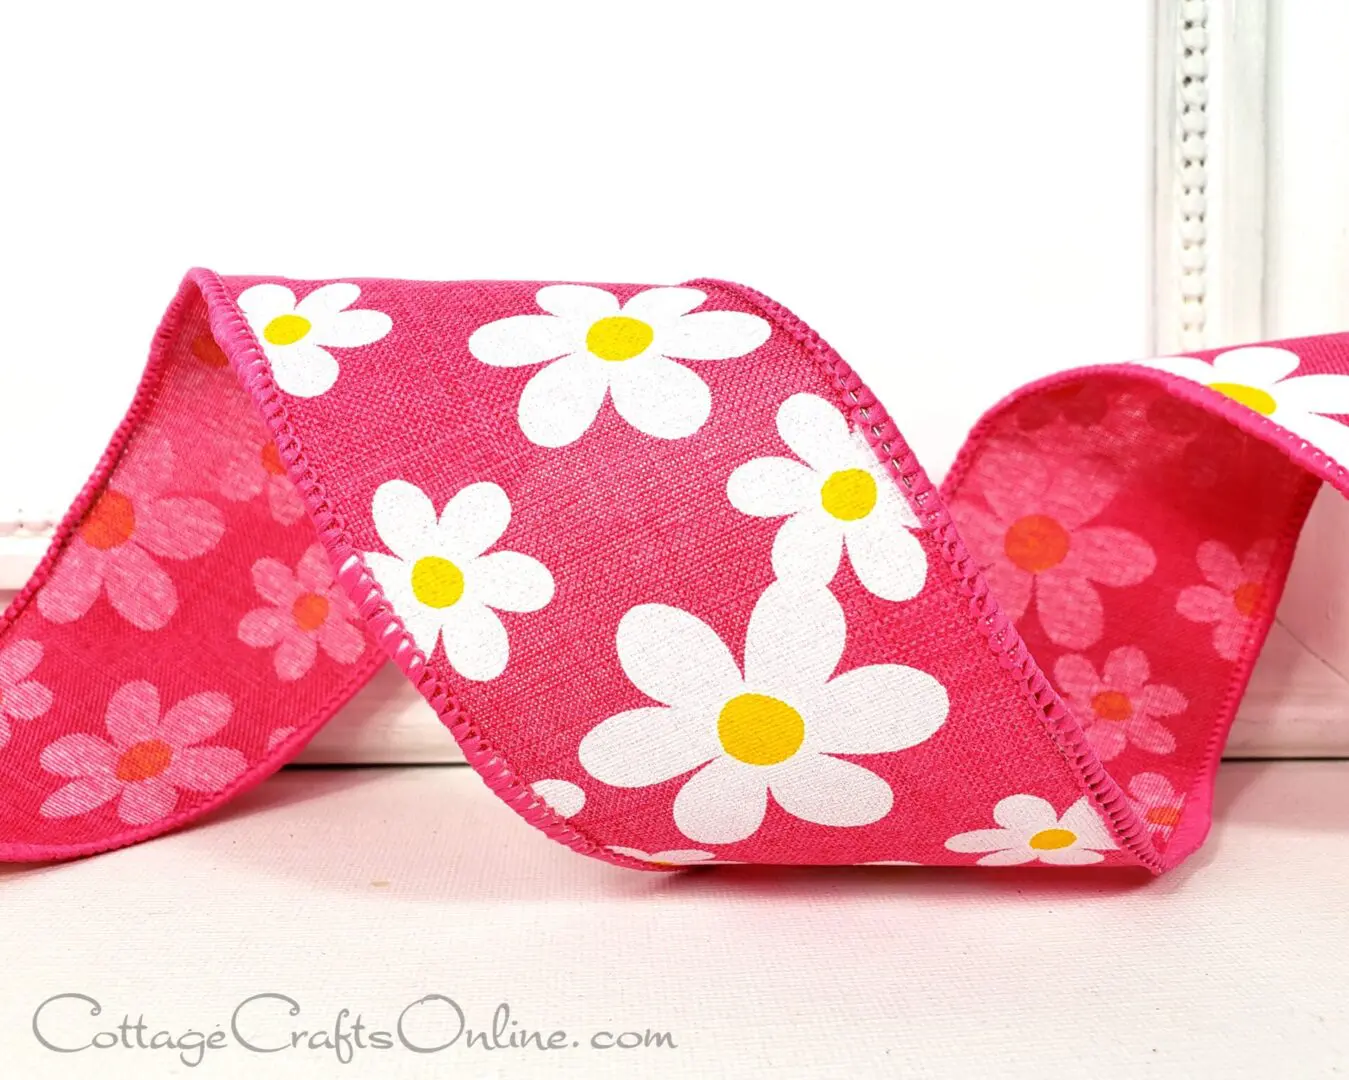 Pop daisies on hot pink 2.5" wide wired ribbon from the Etsy shop of Cottage Crafts Online.